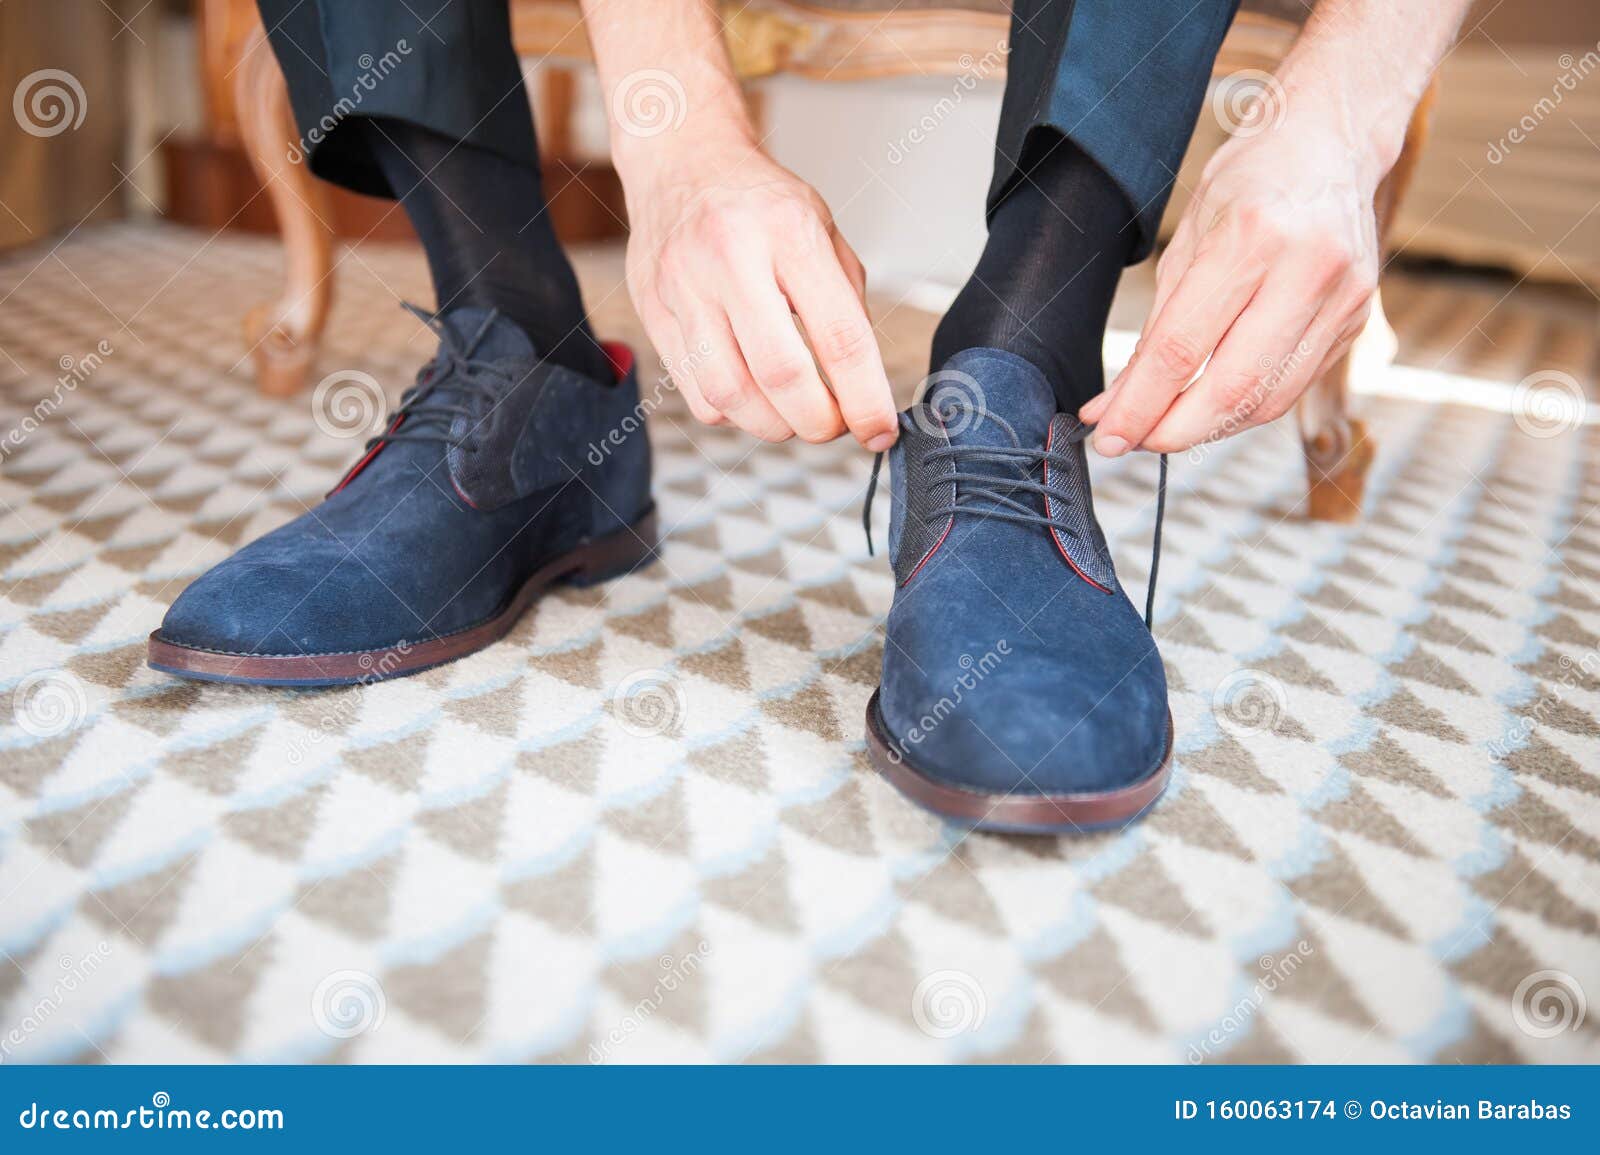 Men Hands Closing Shoelace on Blue Suede Shoes Stock Photo - Image of  businessman, leather: 160063174